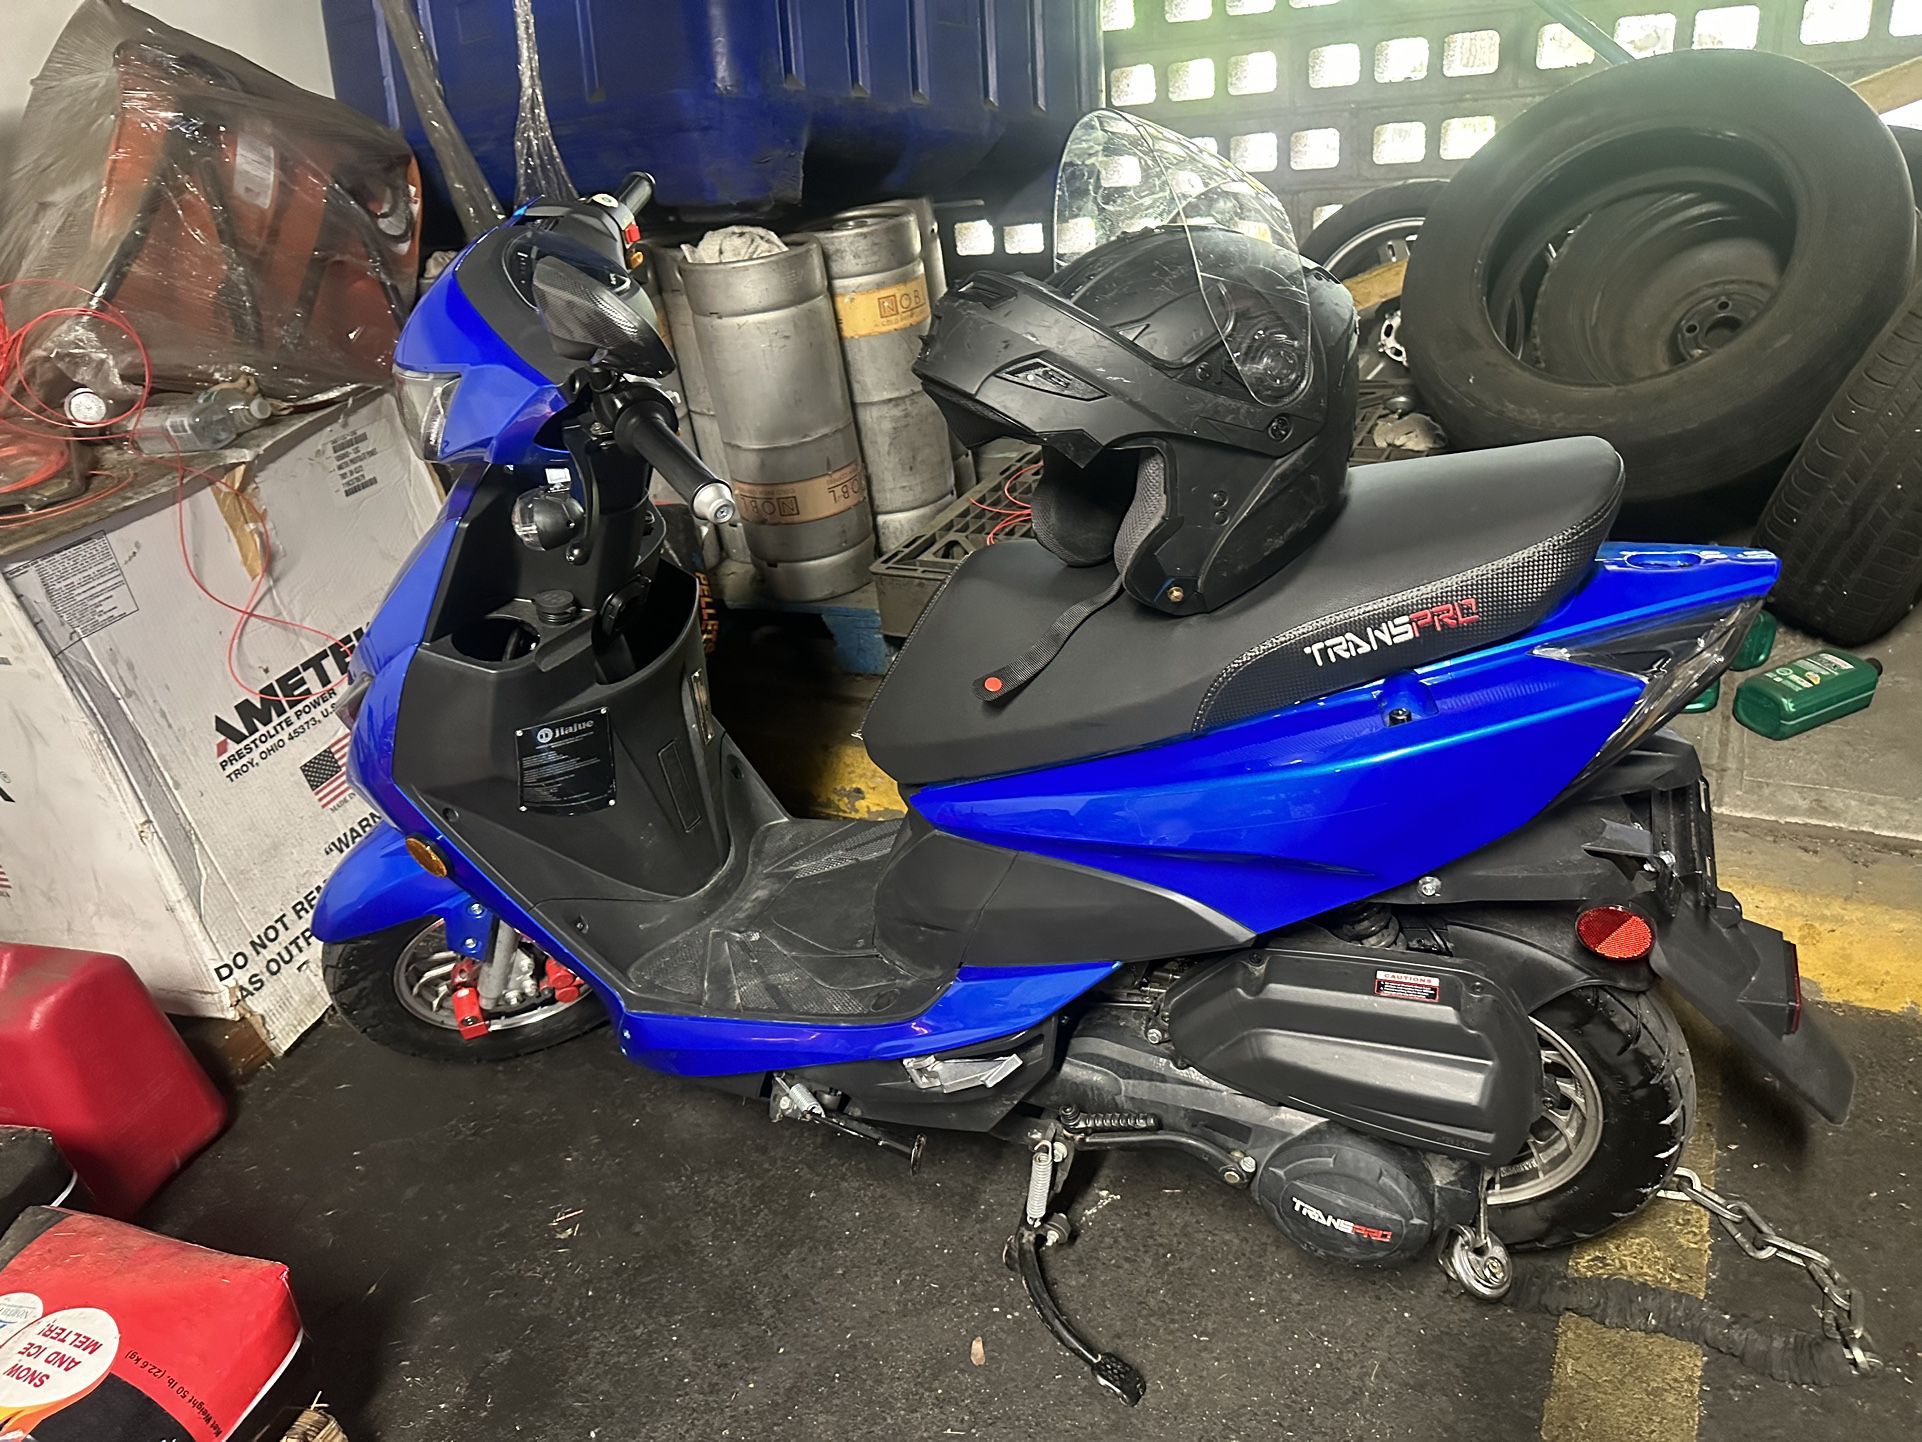 Transpro Scooter 150cc 500$$$$$